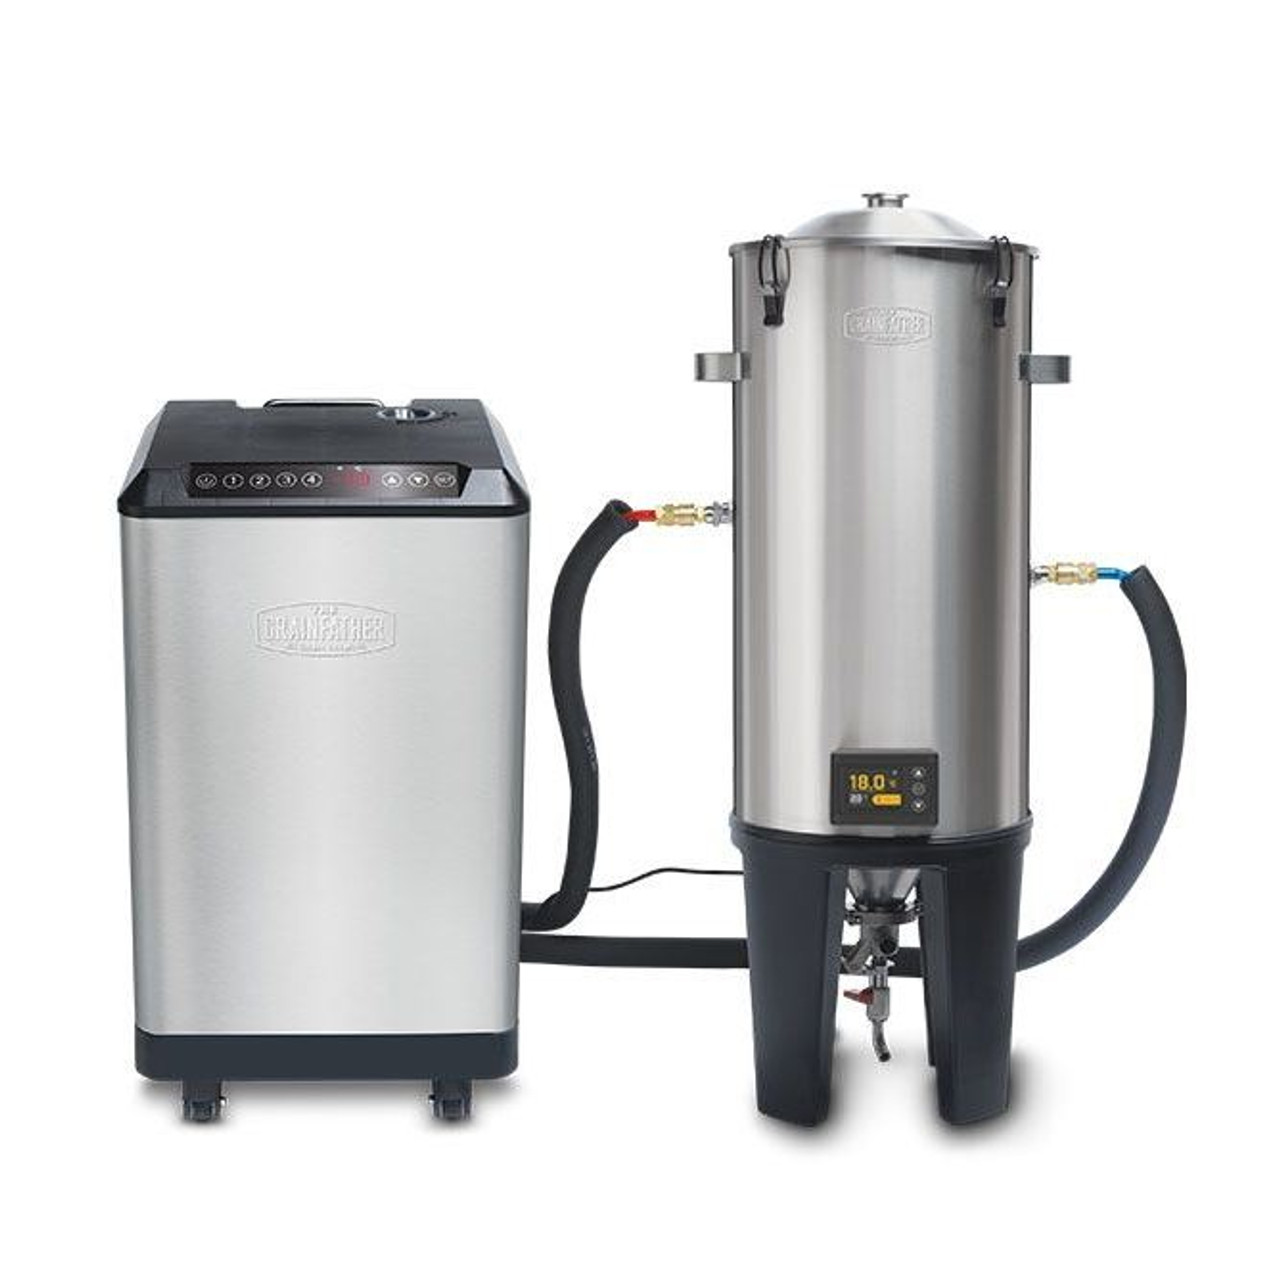 Grainfather Conical Fermenter Advanced Cooling Edition with GC4 Glycol Chiller